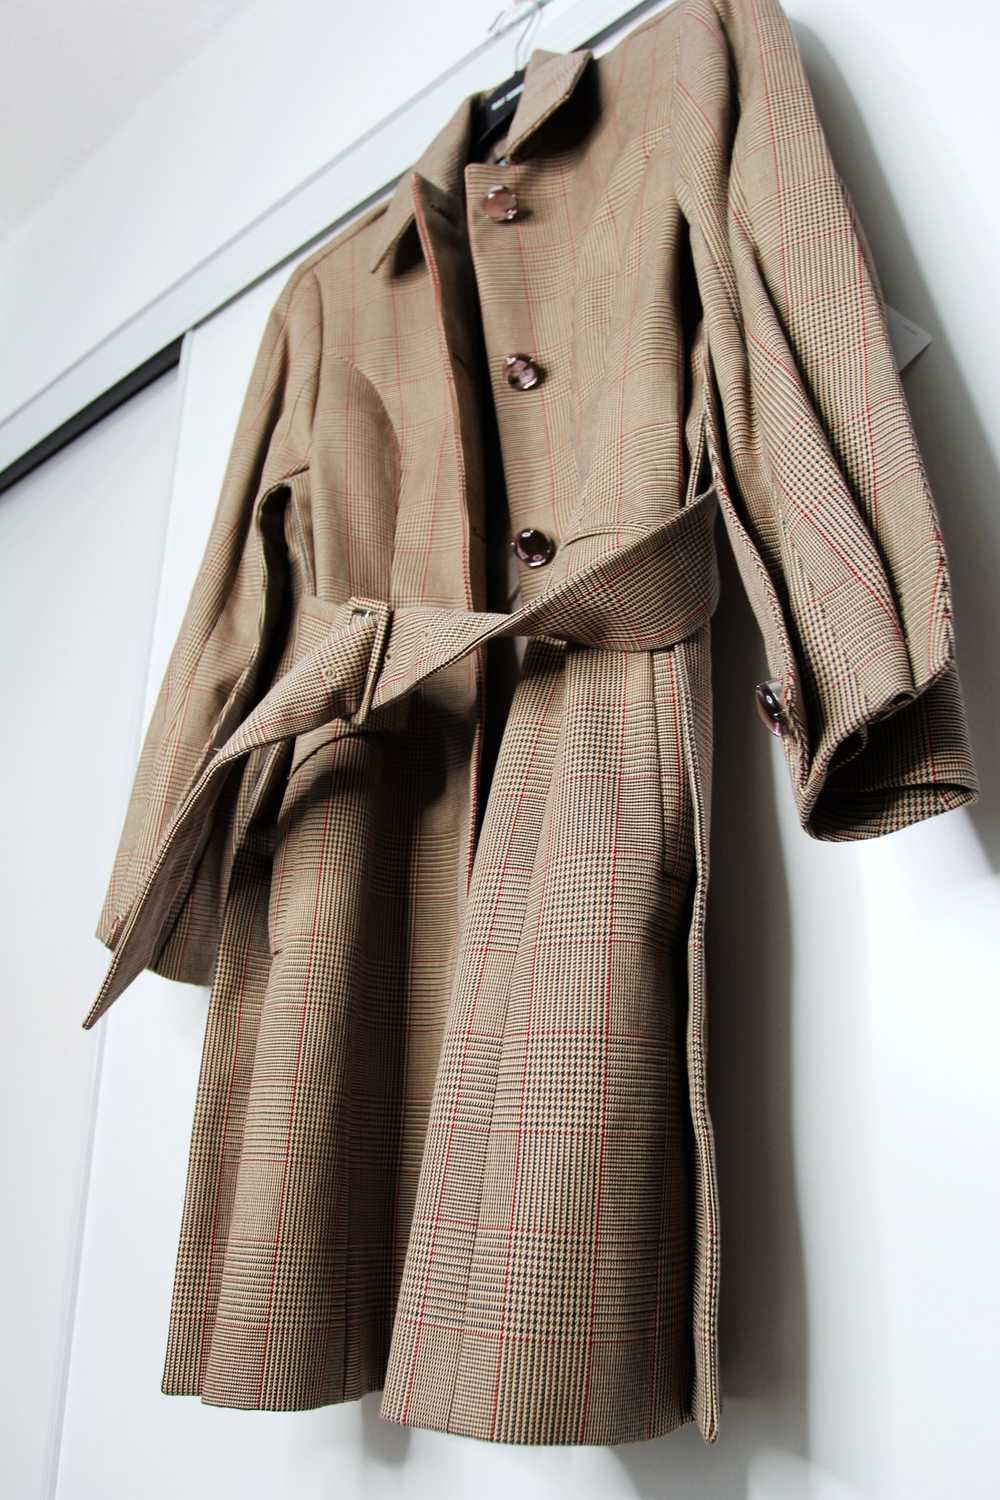 Y/Project SS19 Y/PROJECT PLAID PRINT TRENCH COAT L - image 8